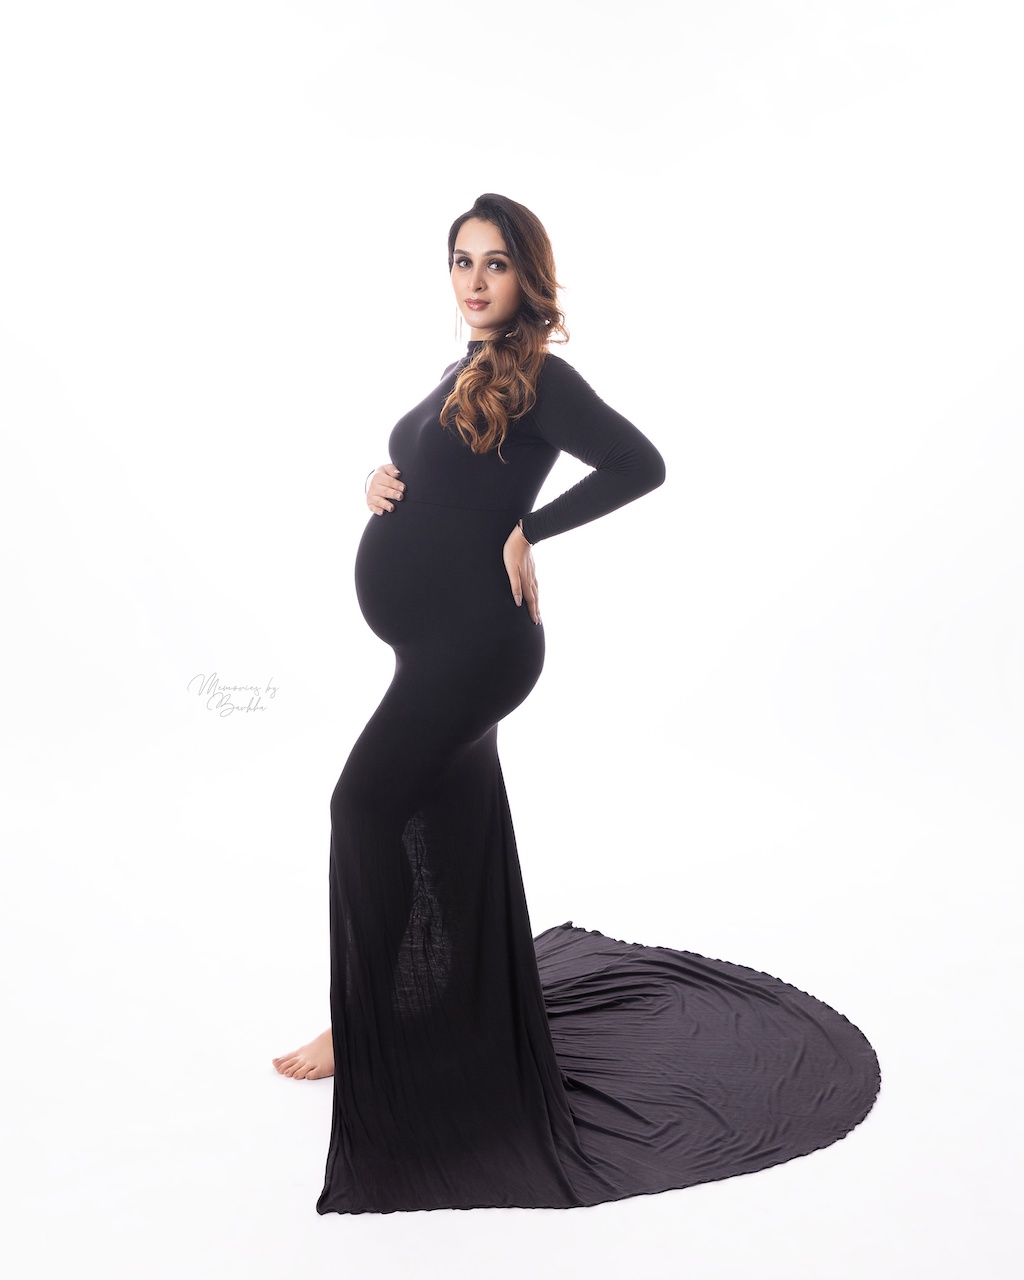 Interesting tips for maternity photoshoot for a great experience